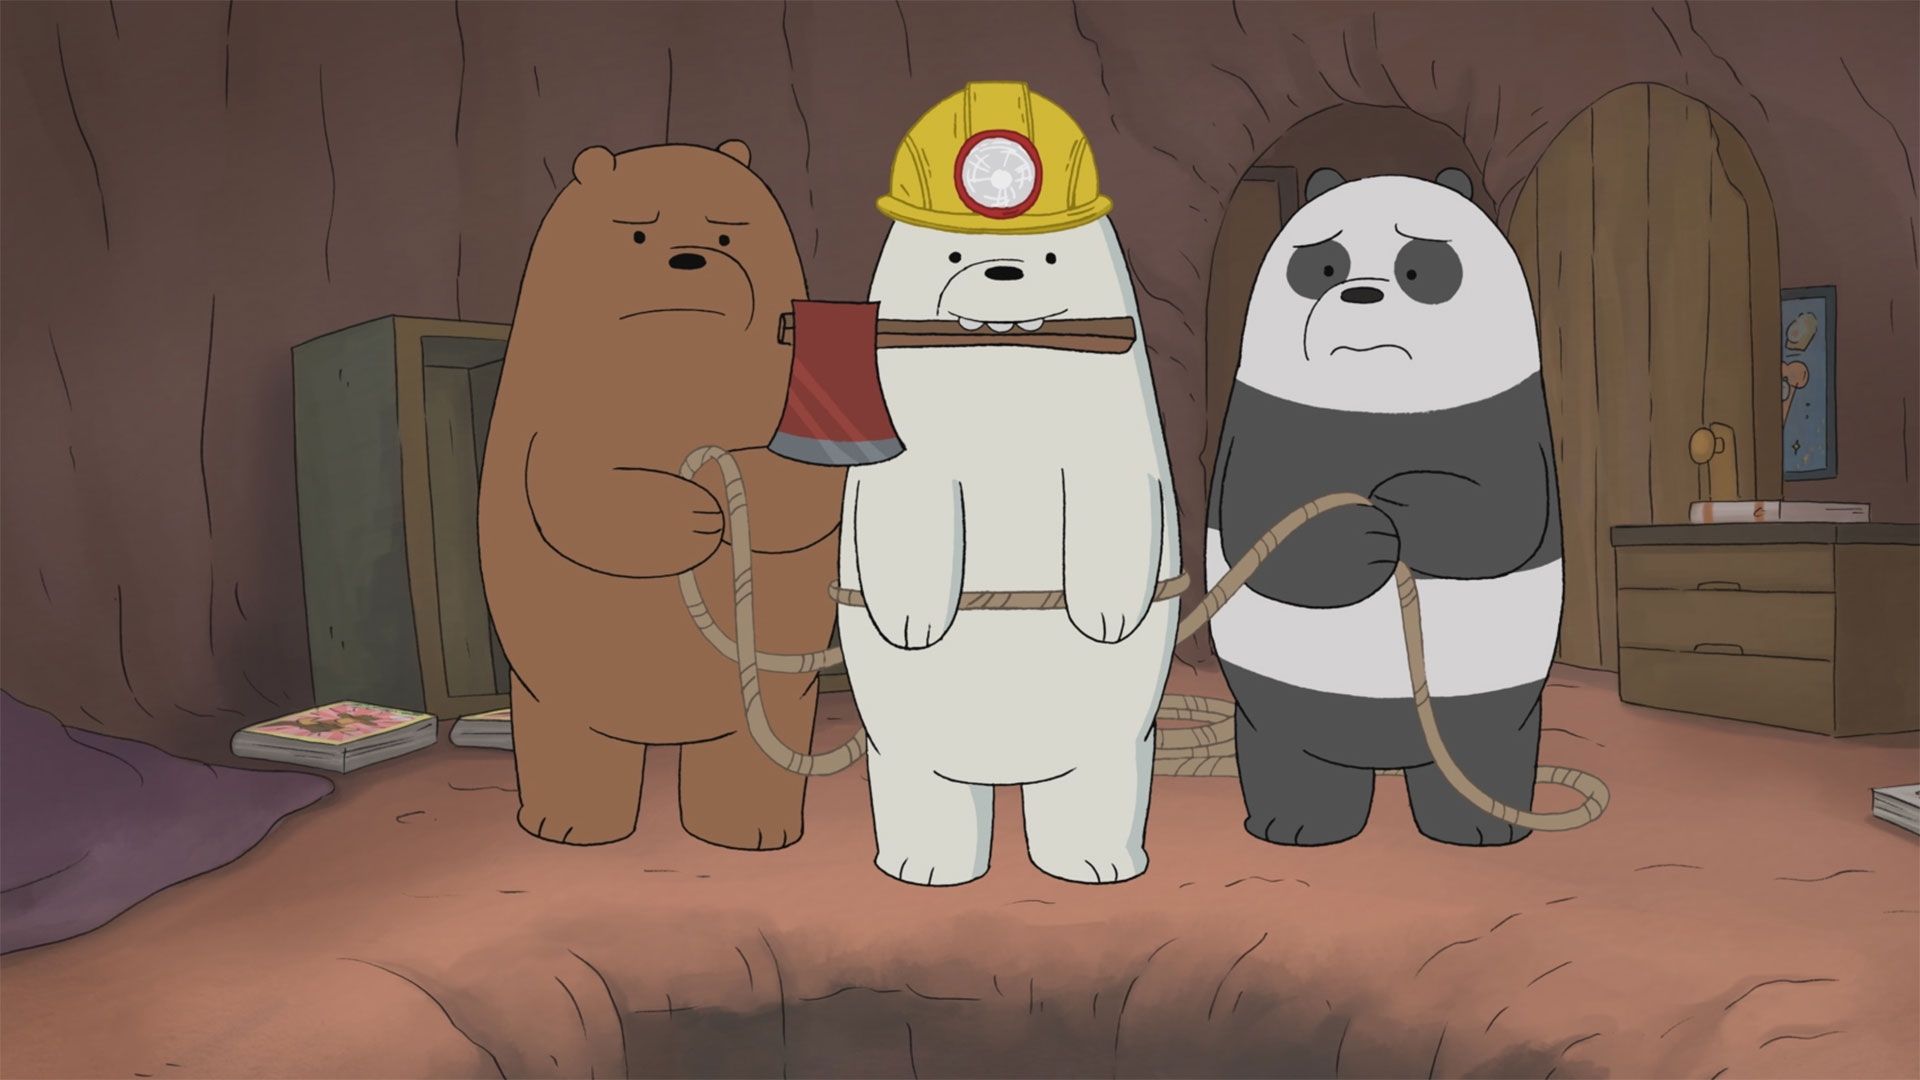 We Bare Bears: The Movie is coming to theaters in 2020. - We Bare Bears